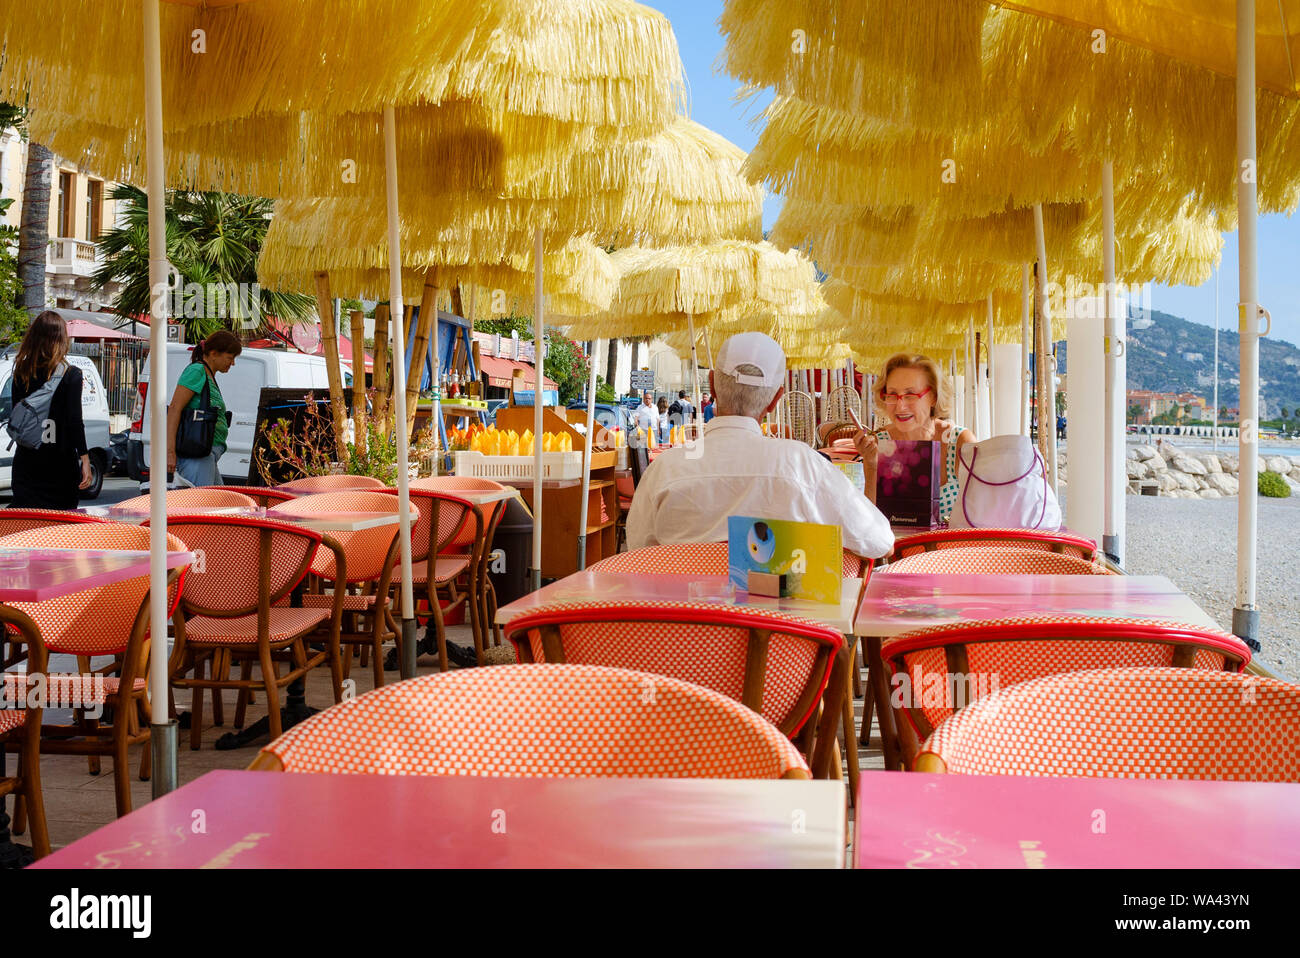 Elderly couple enjoy an outdoor meal in a beach-side street cafe / restaurant in the Old City of  Menton in the Cote d'Azure South of France Stock Photo